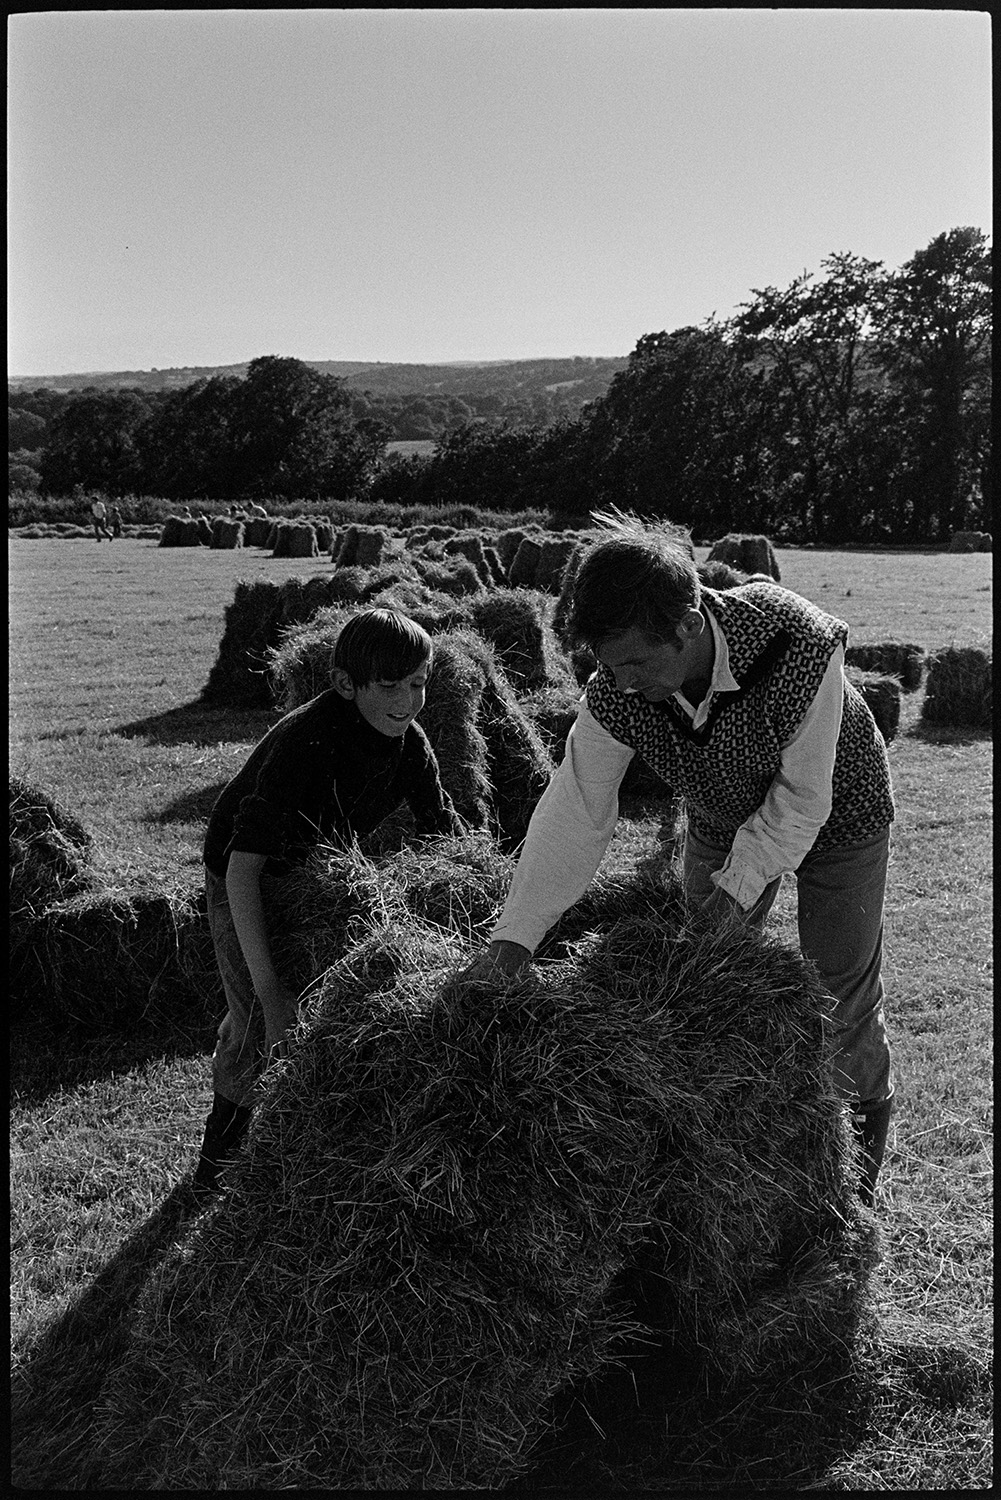 Children watching and helping farmer bale hay. 
[A boy helping Michael Morpurgo stack hay bales together in a field at Parsonage, Iddesleigh.]